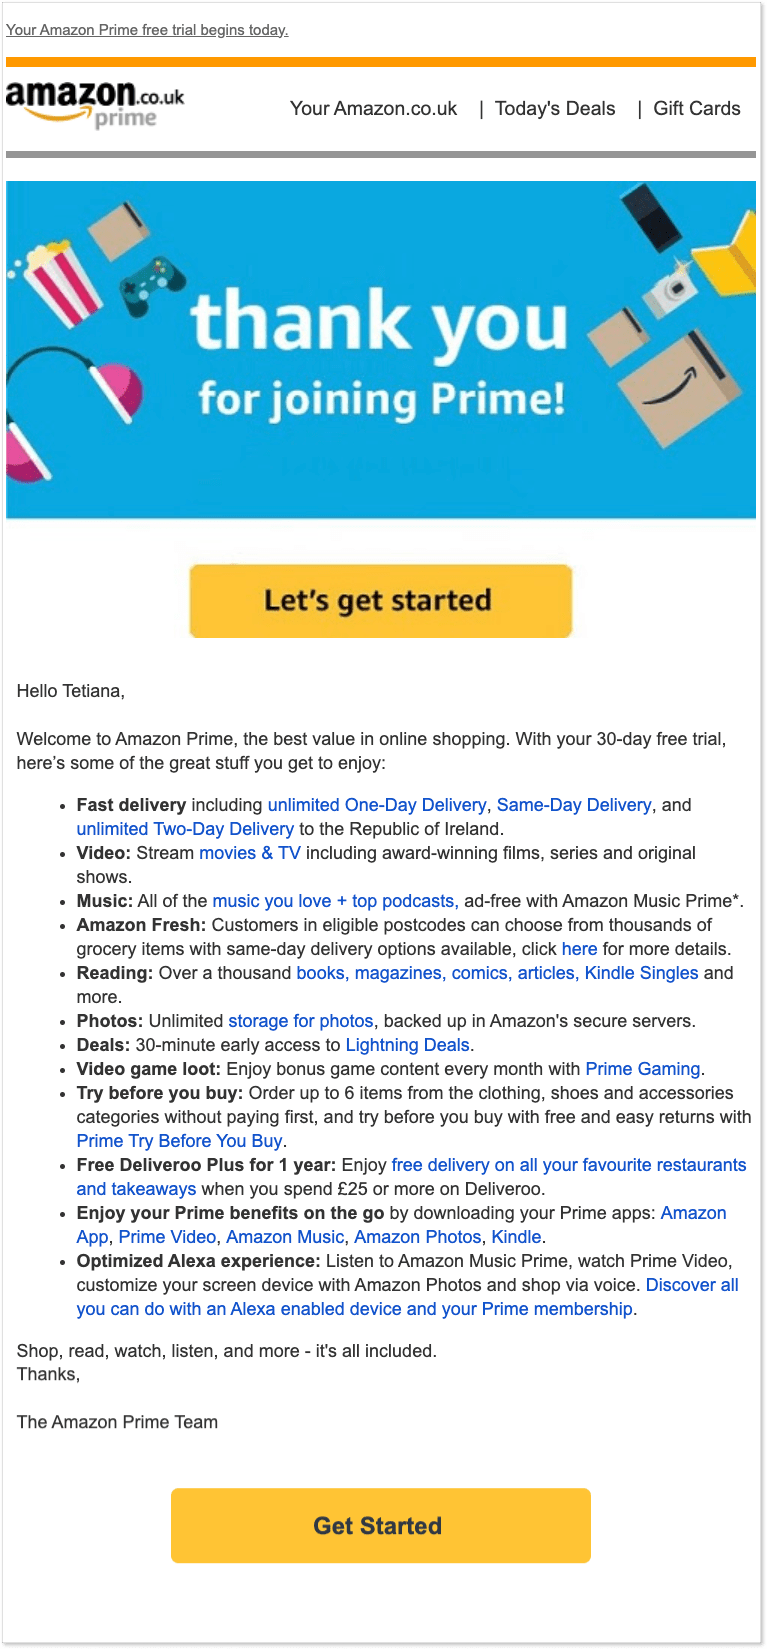 Welcome message by Amazon Prime